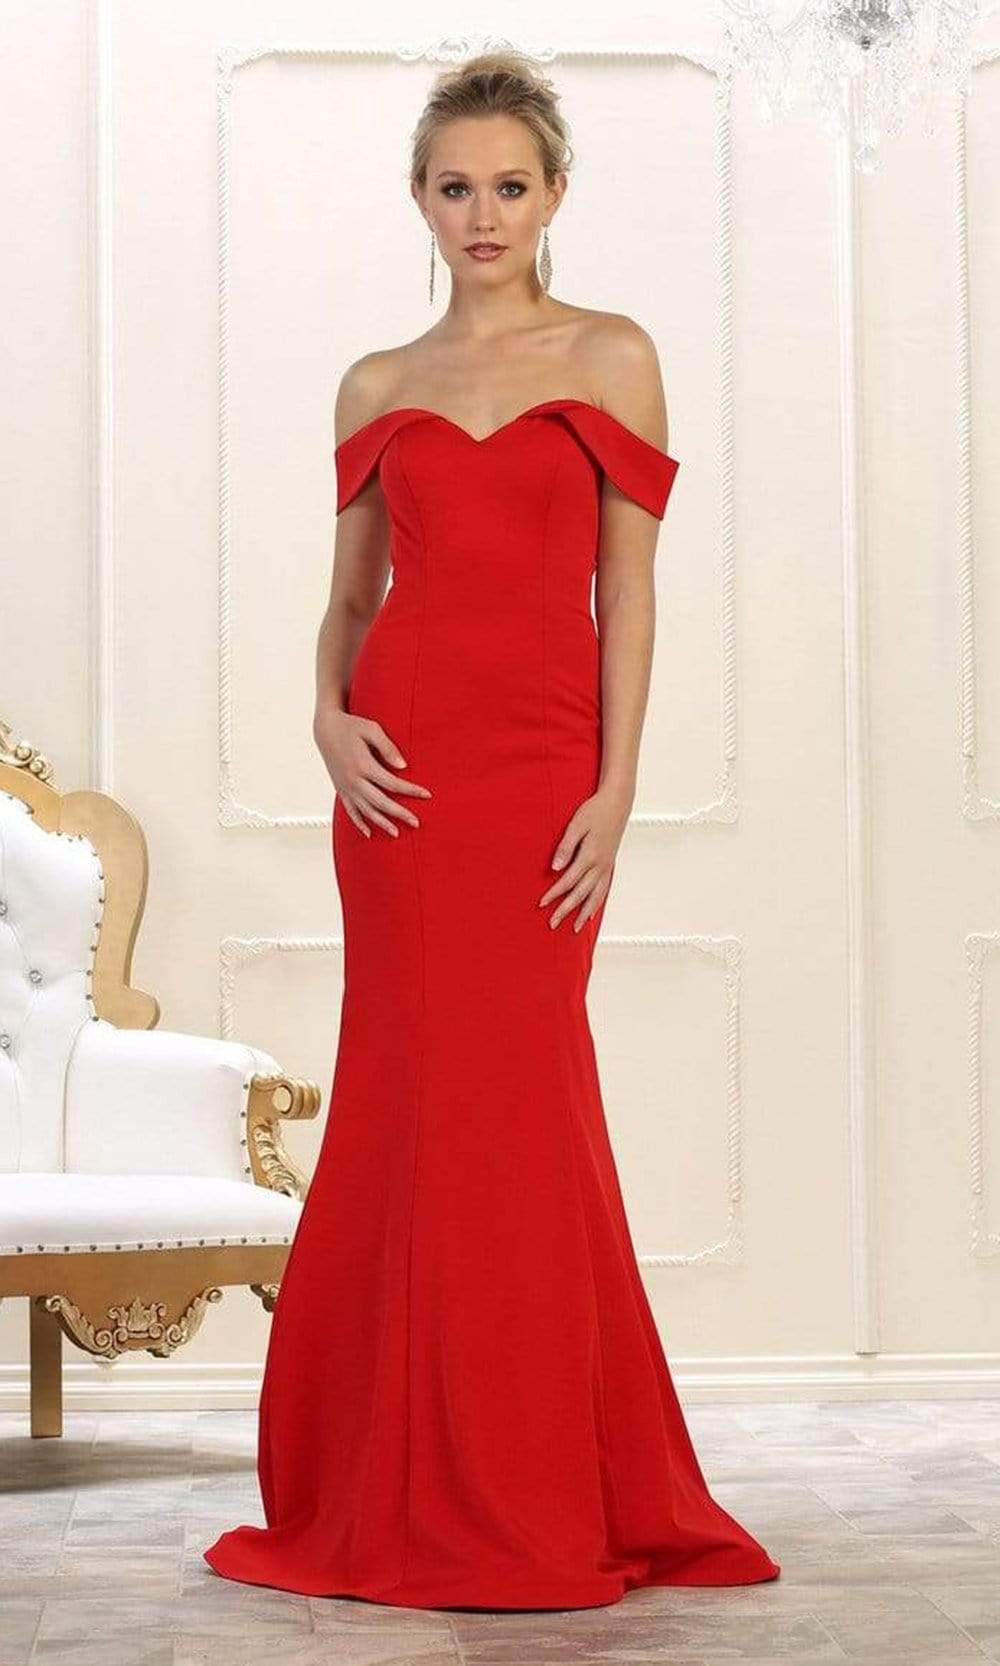 May Queen - MQ1547 Off Shoulder Mermaid Evening Gown Bridesmaid Dresses 2 / Red